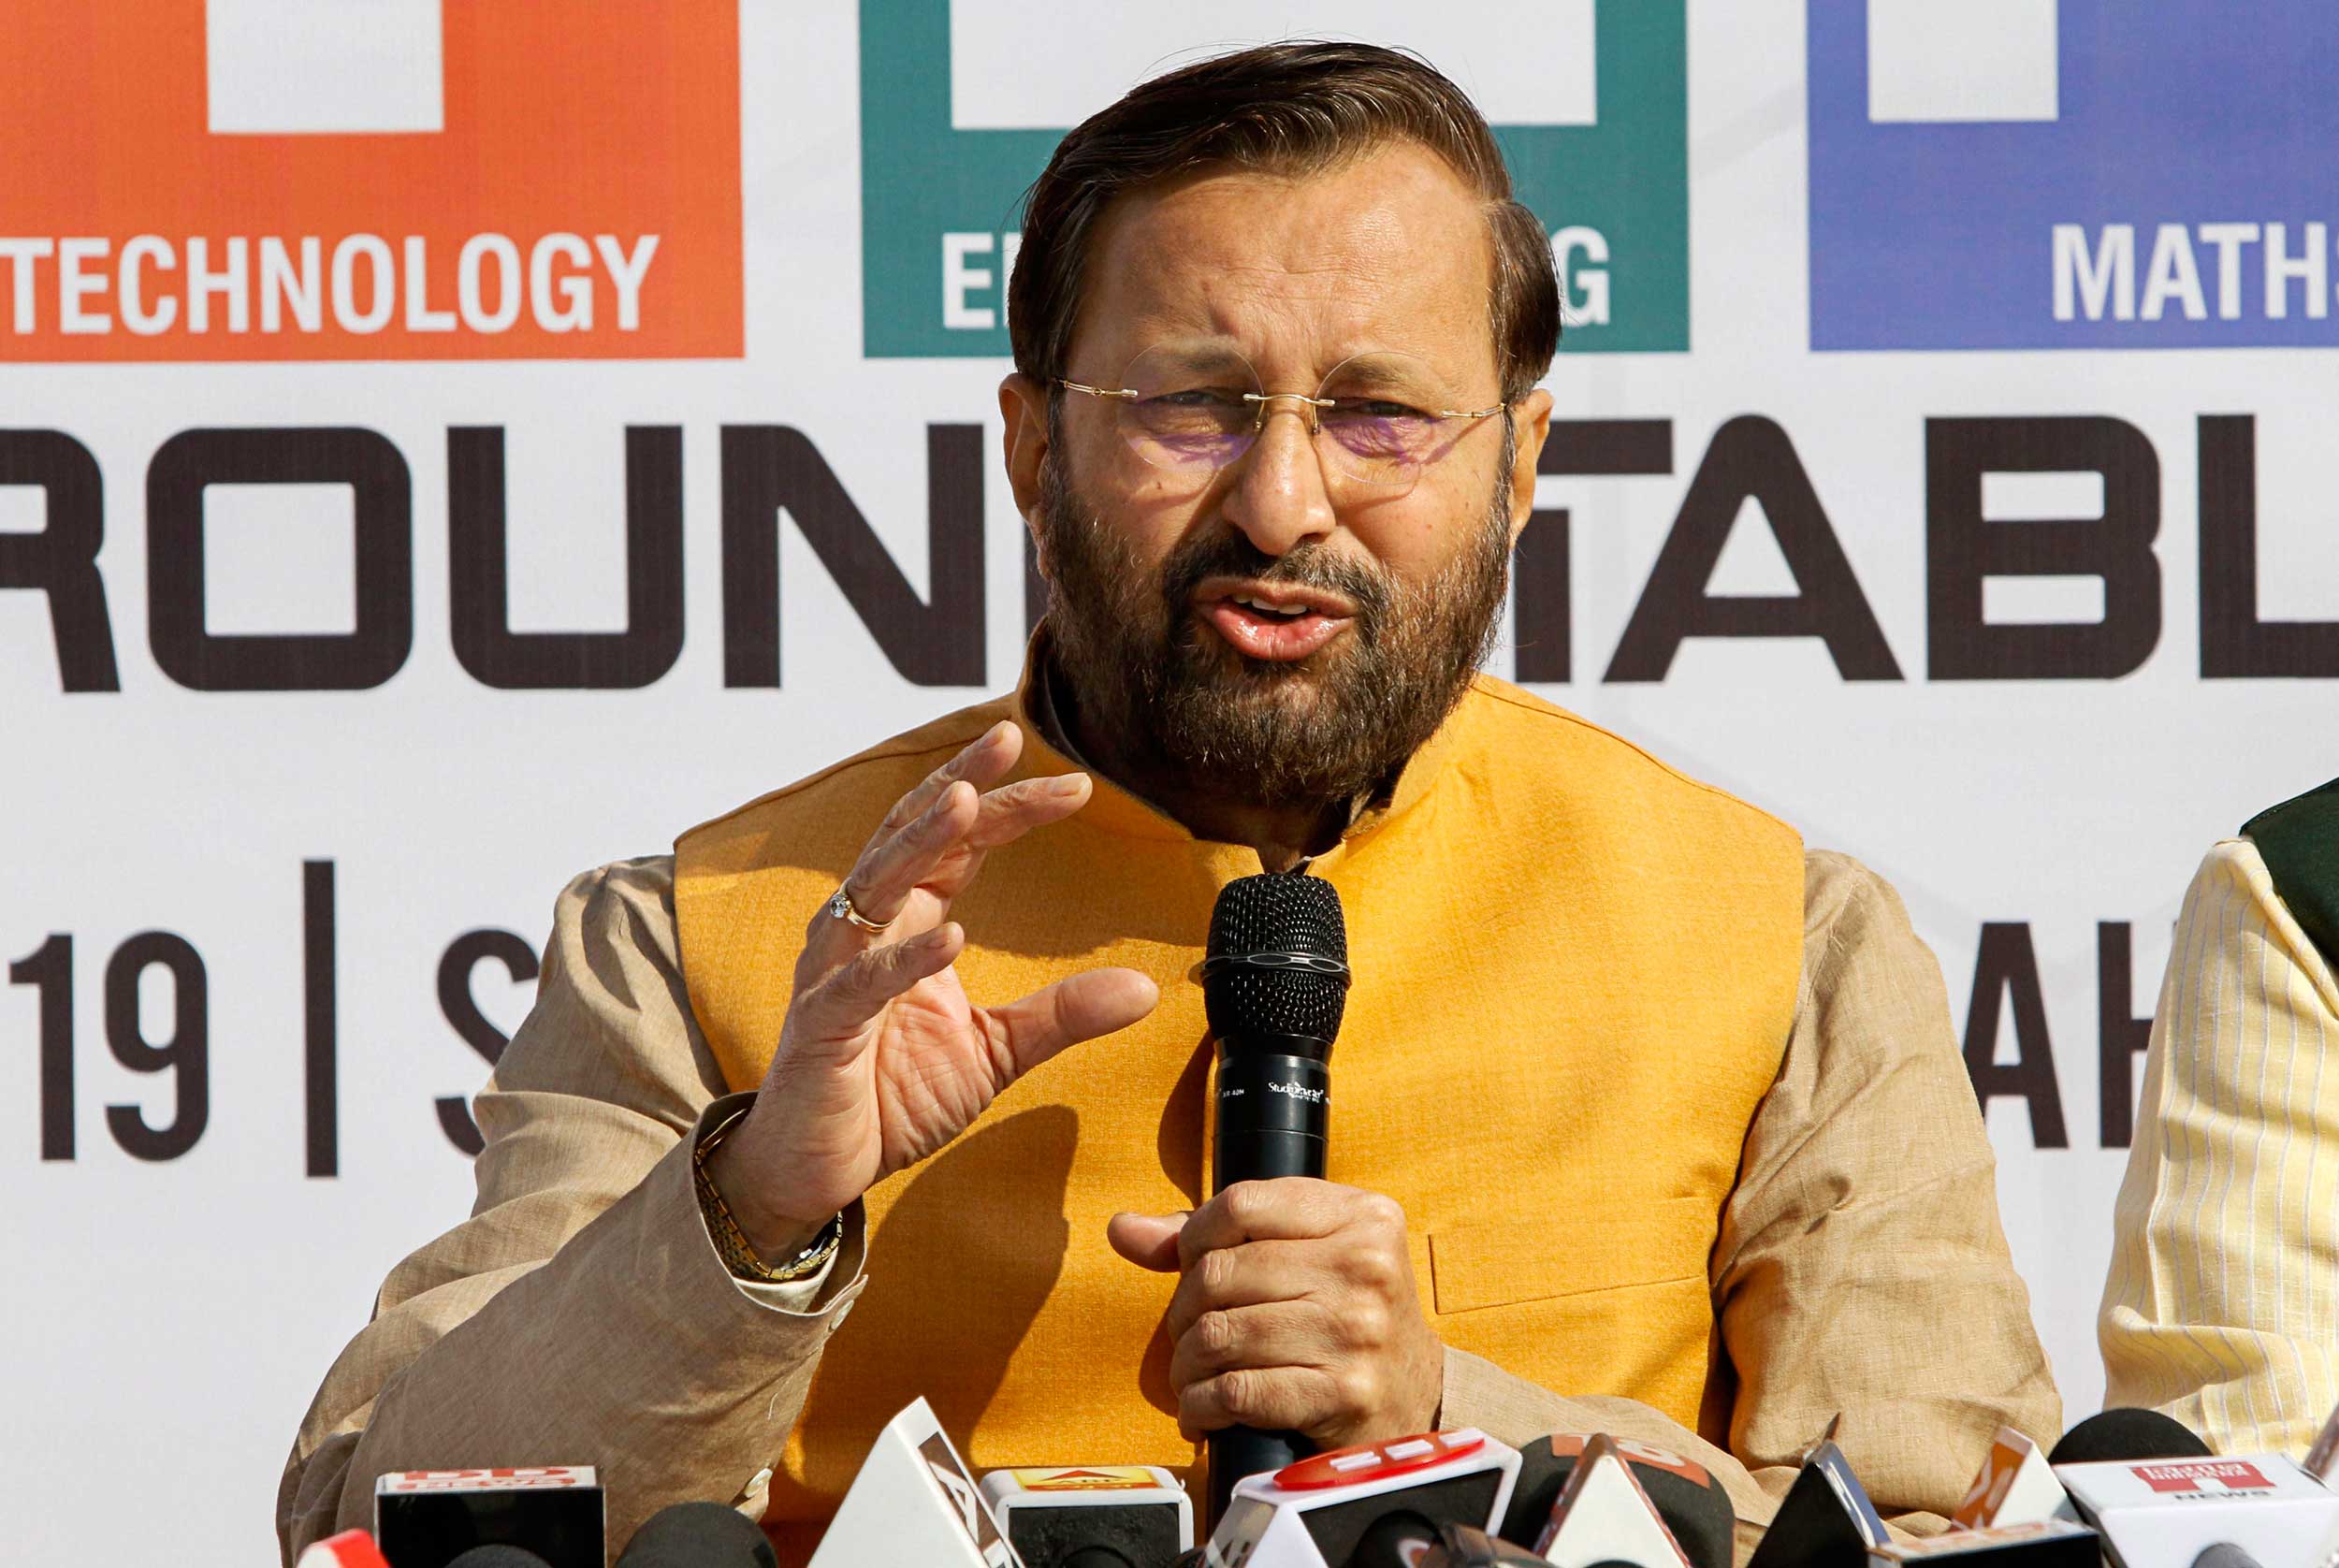 Prakash Javadekar addresses a press conference ahead of the Global Vibrant summit 2019 at Science City in Ahmedabad on Thursday. 